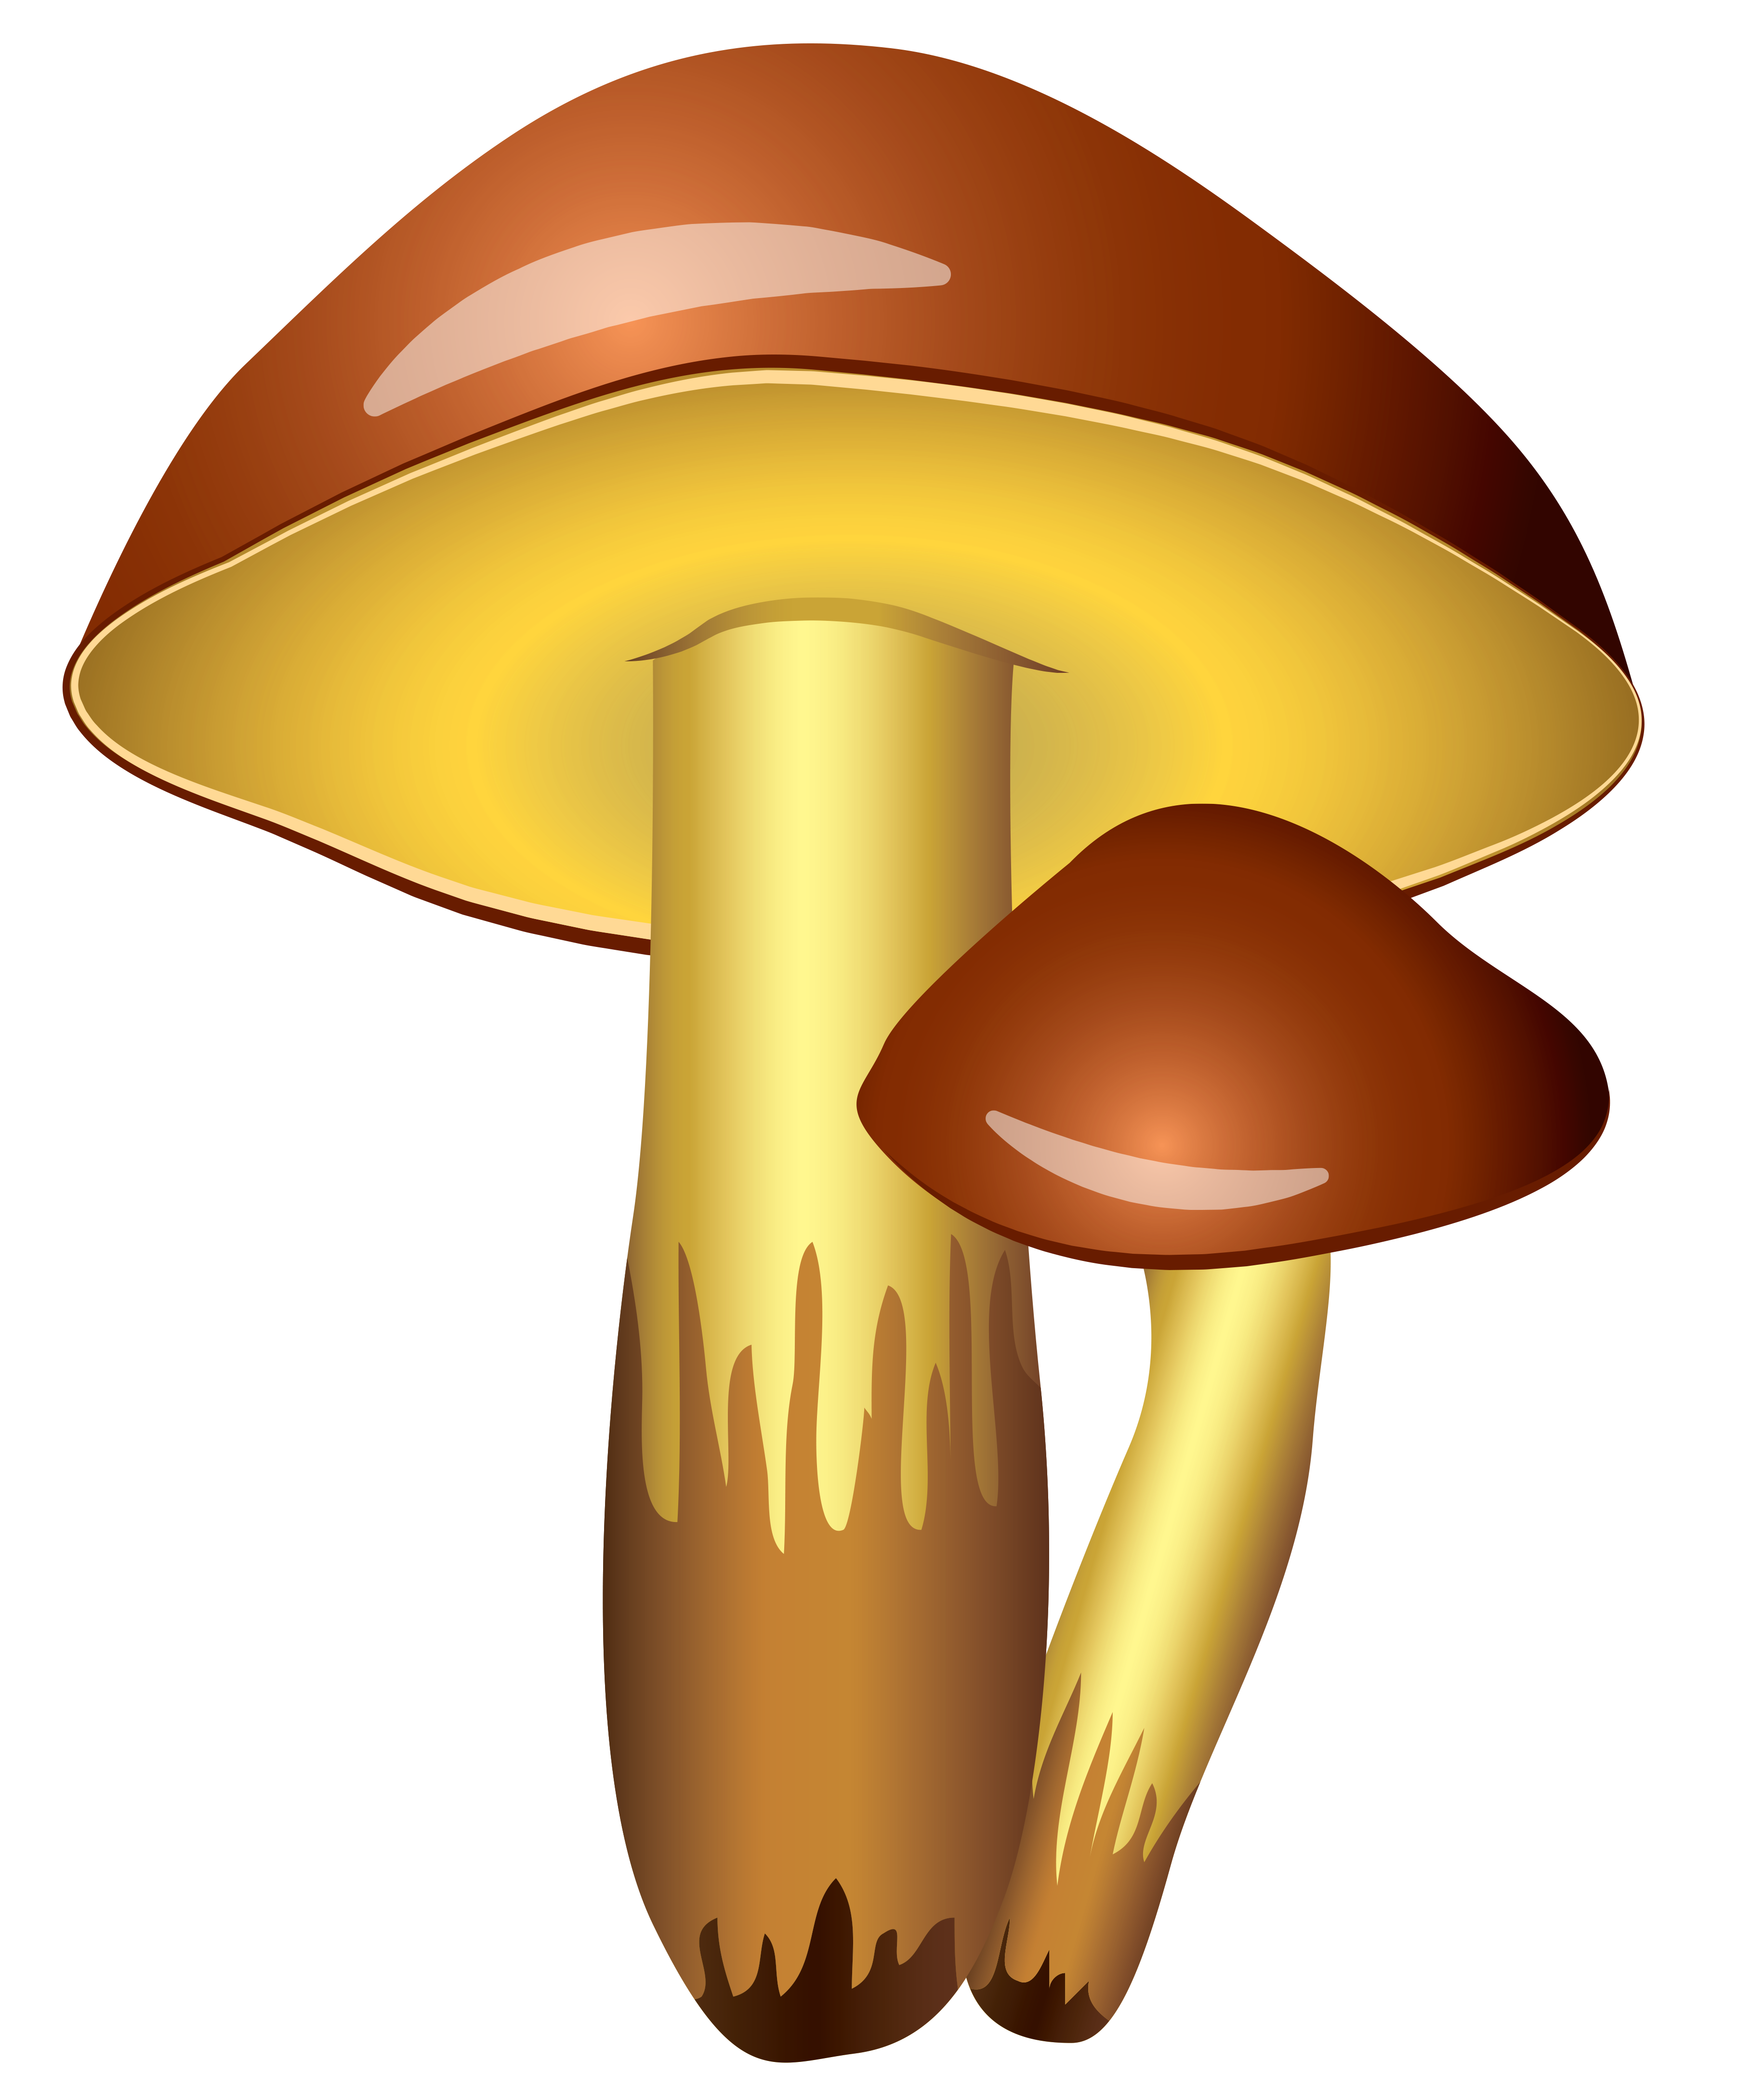 Transparent png picture gallery. Mushrooms clipart mushroom home